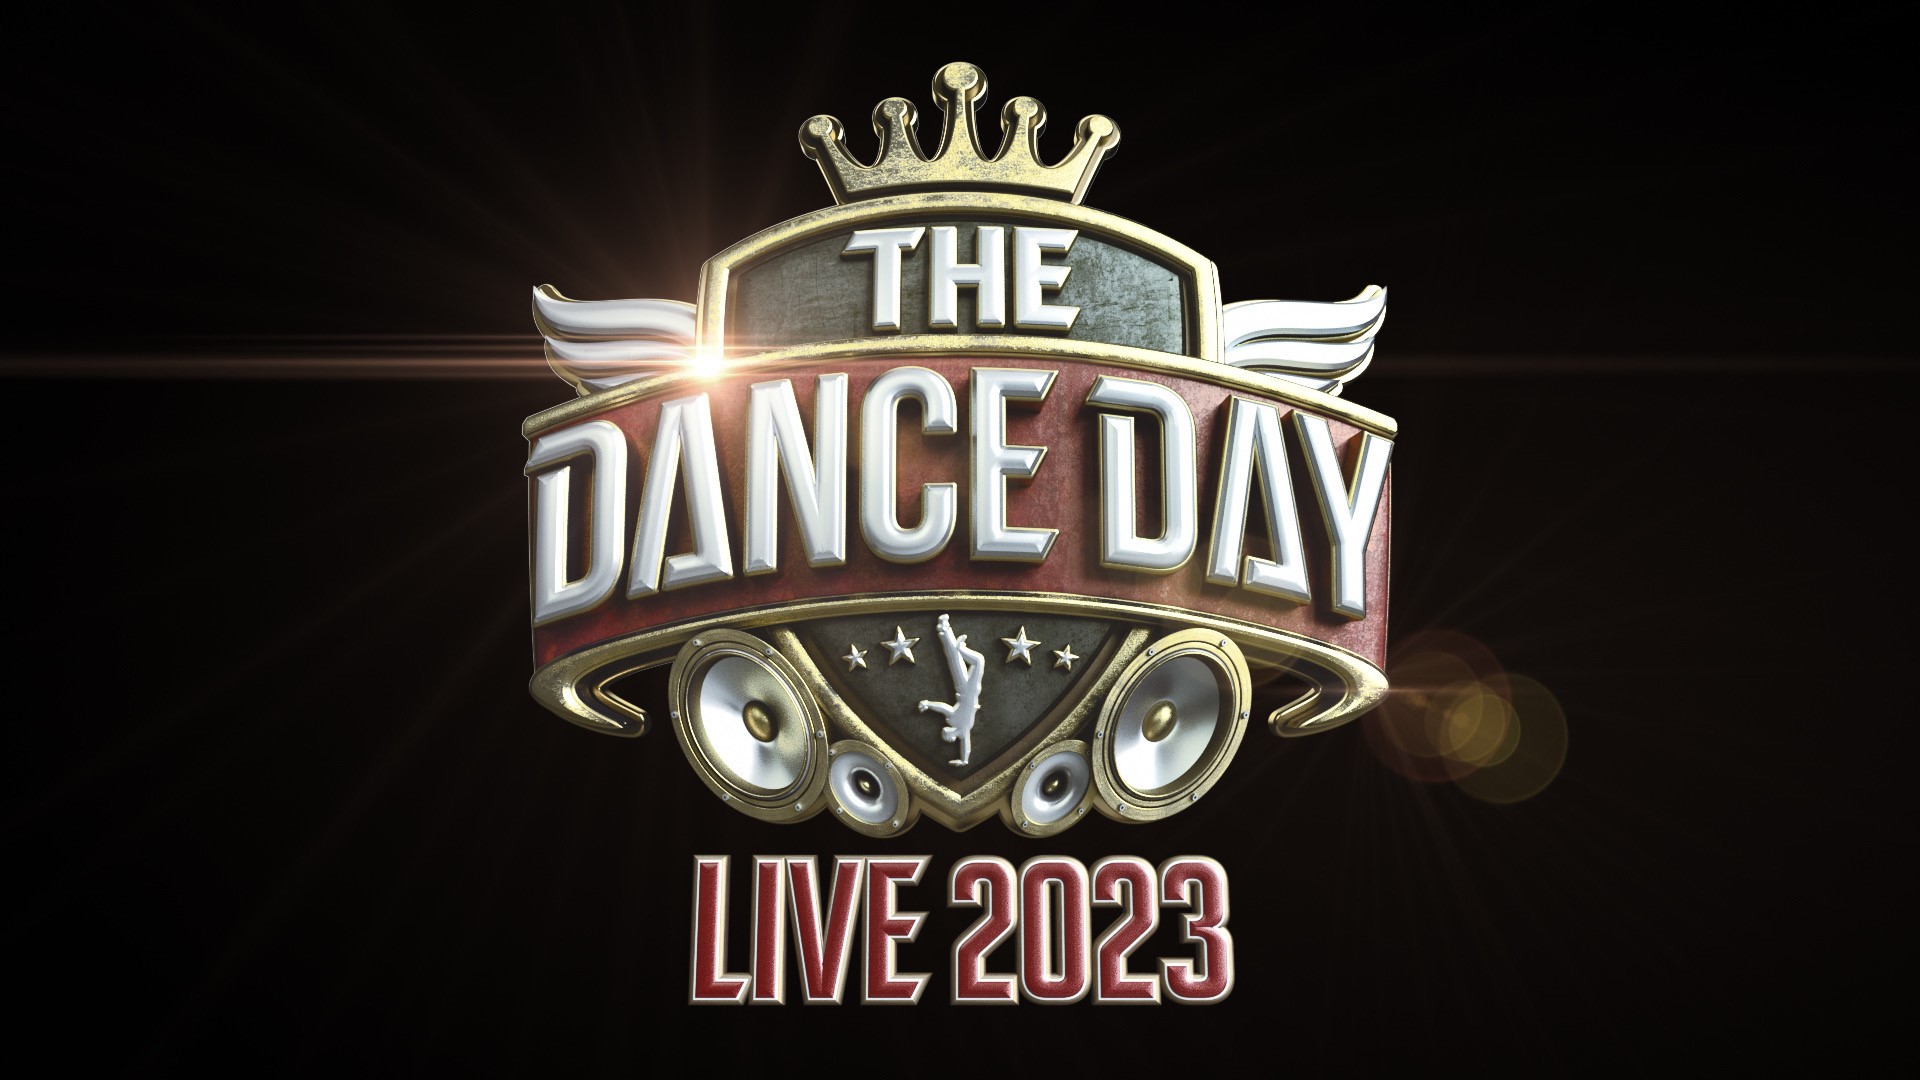 THE DANCE DAY LIVE 2023のロゴ